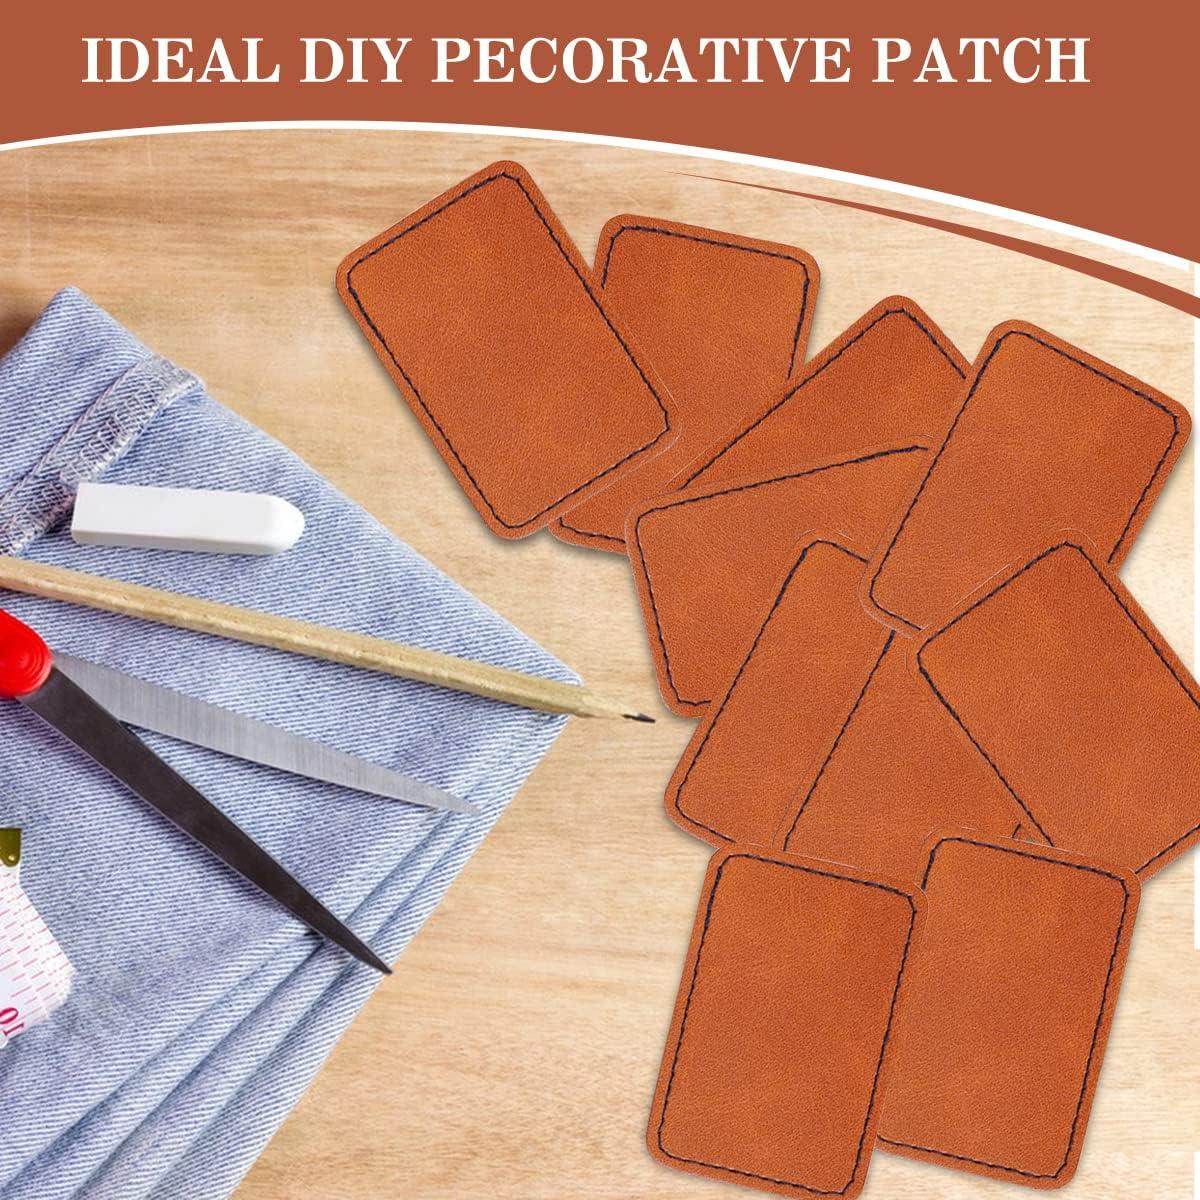 100 Pcs Blank Leatherette Hat Patches with Adhesive Leather Patches for Hats Bla